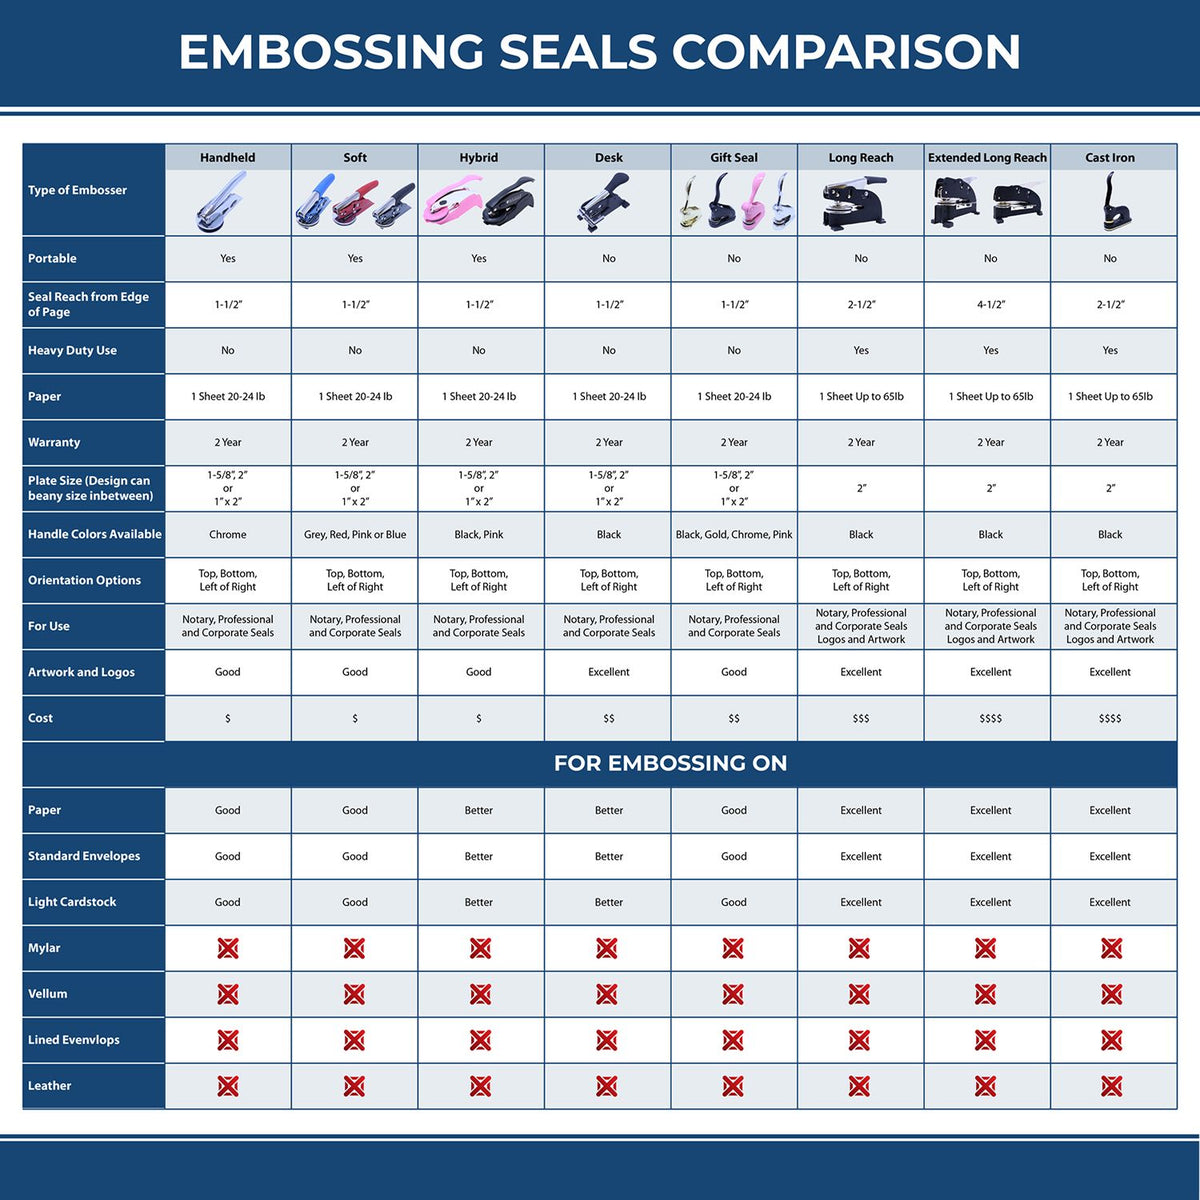 A comparison chart for the different types of mount models available for the Handheld Louisiana Professional Engineer Embosser.